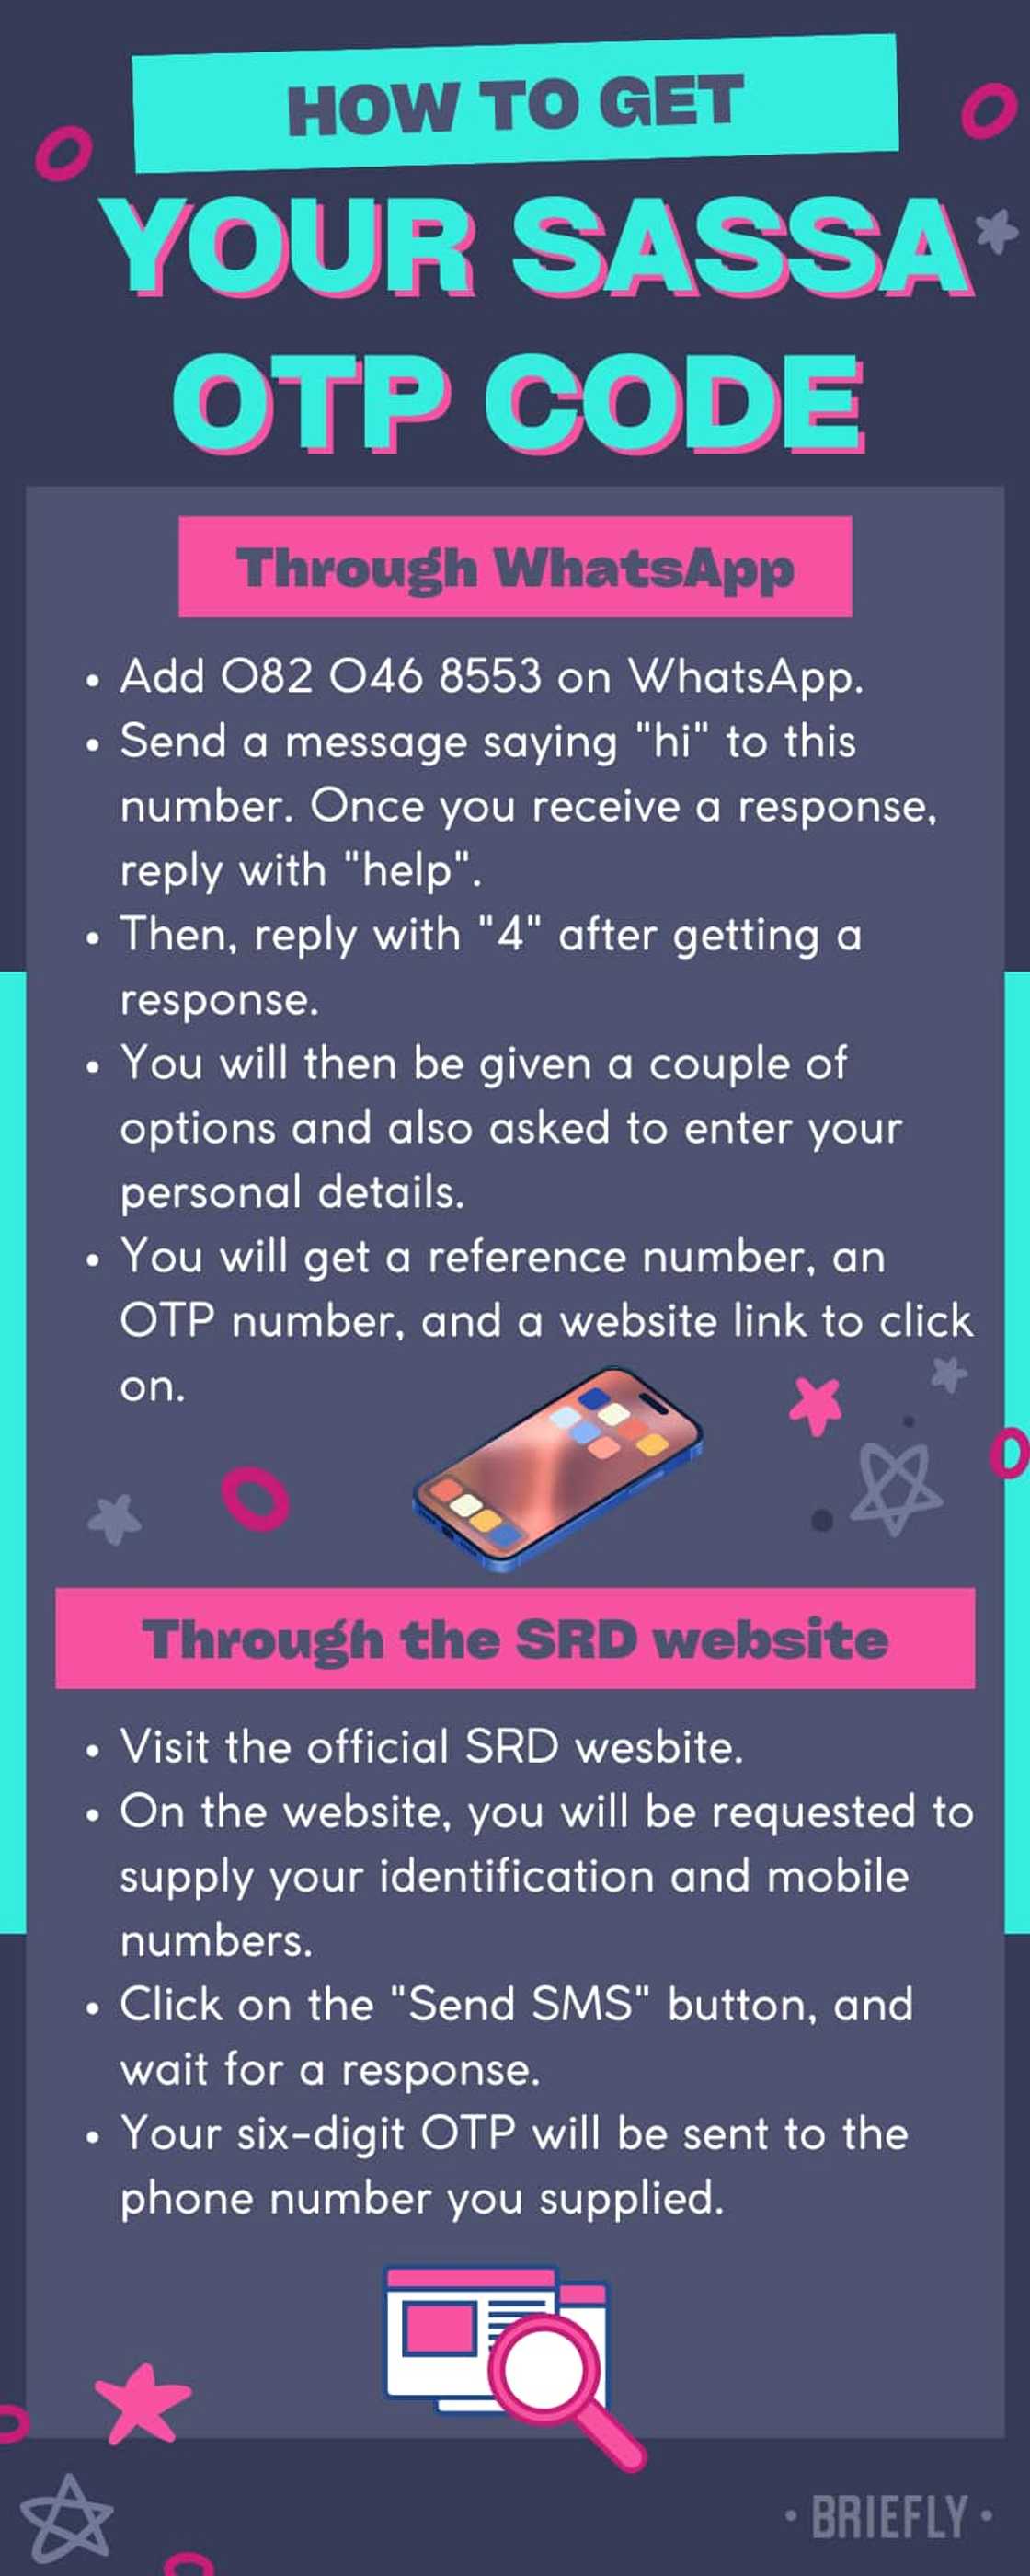 How to get your SASSA OTP code